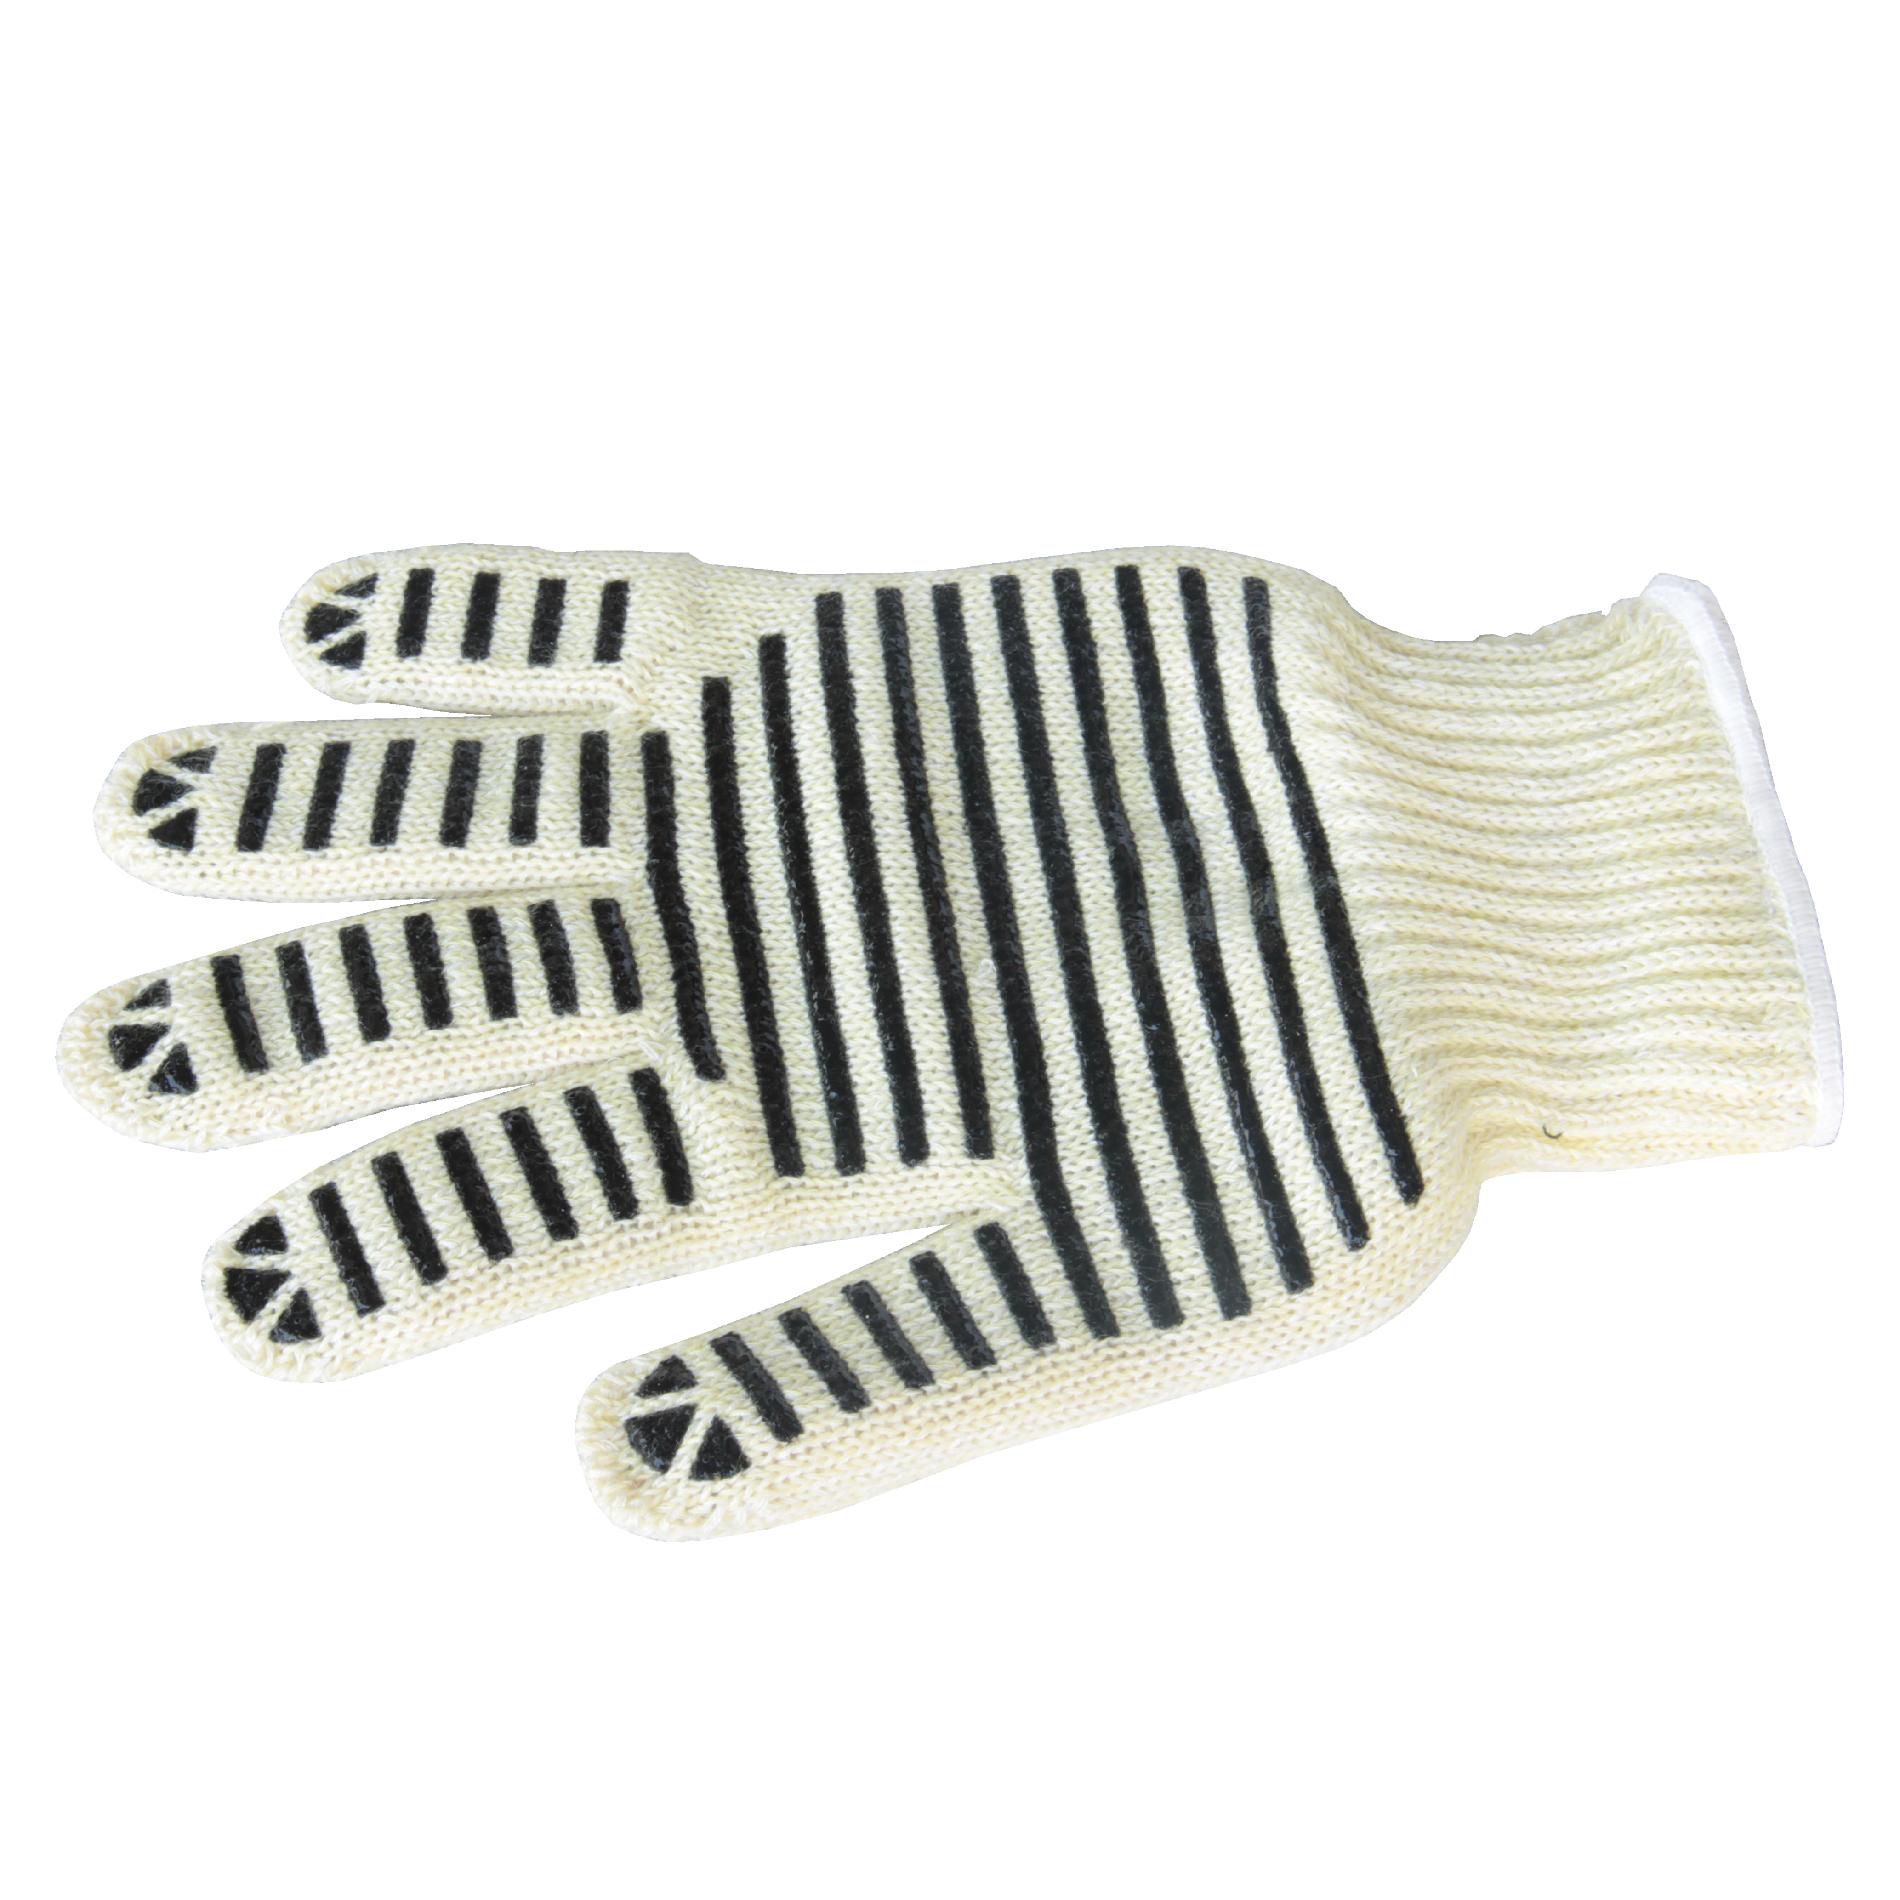 Kenmore Cooking & Grilling Glove